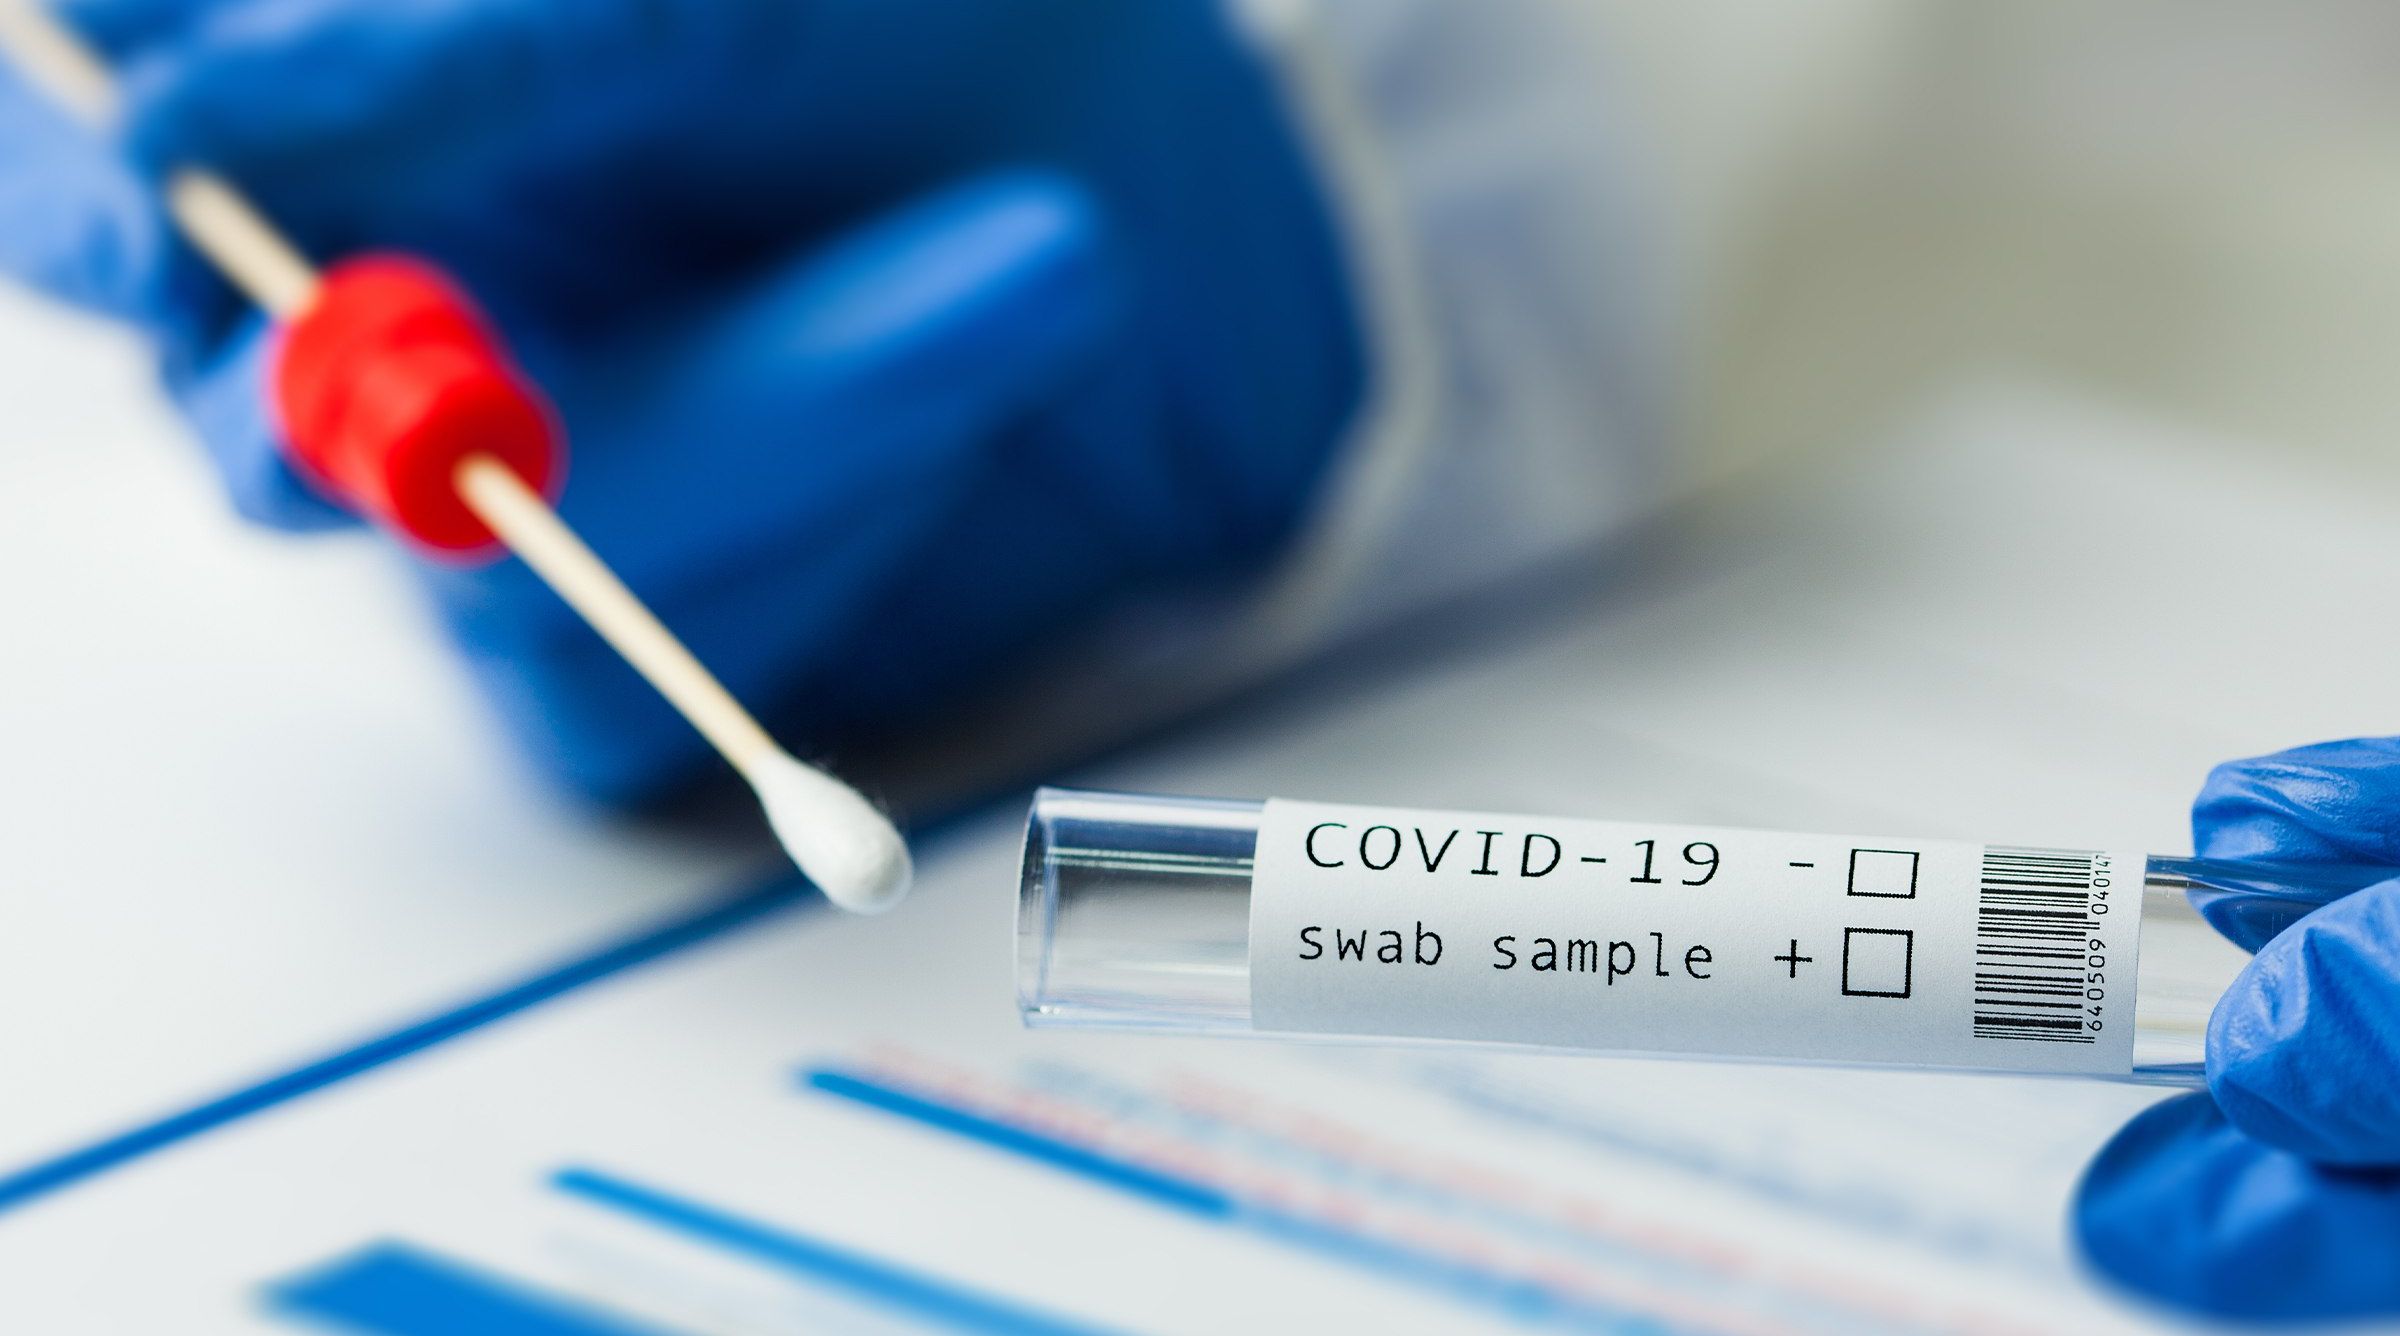 UAE University study confirms effectiveness of mass testing in containing Covid-19 in UAE